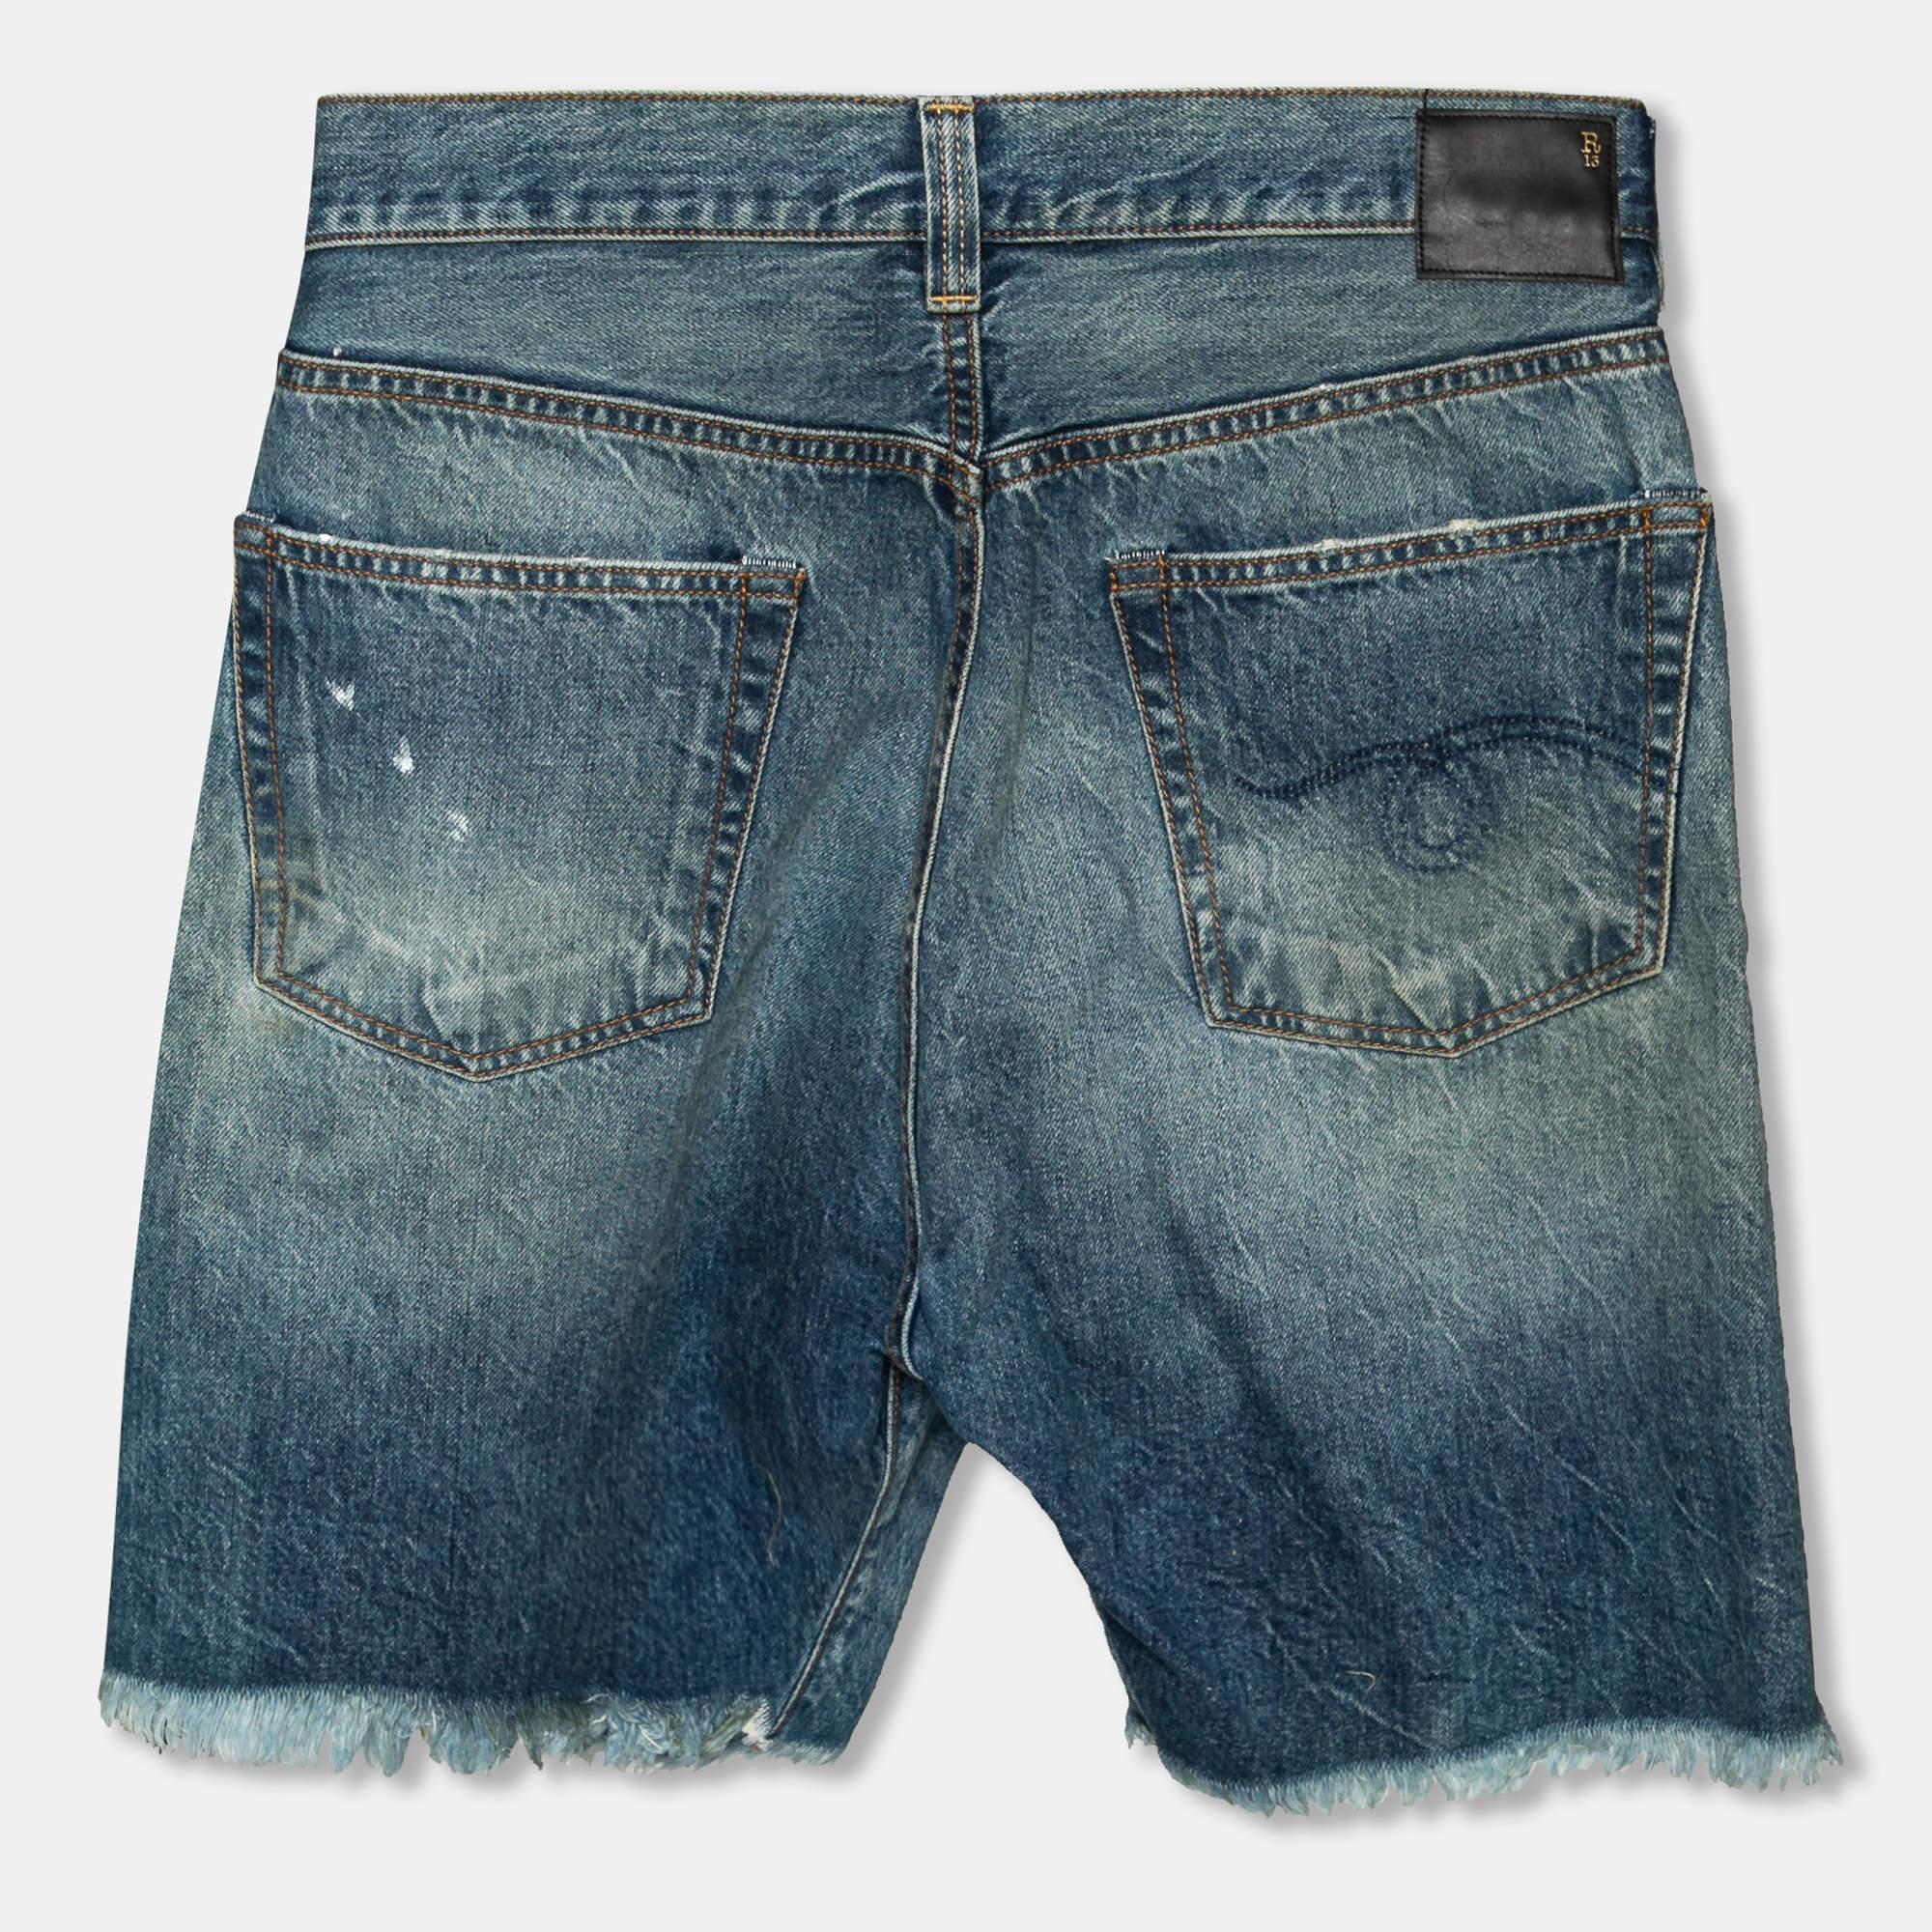 Update your wardrobe with these shorts from R13. Designed for a comfy fit and stylish look, these blue denim shorts have an asymmetric front closure, five pockets, and frayed edges. Wear yours with a comfortable T-shirt, sneakers, and sunglasses on